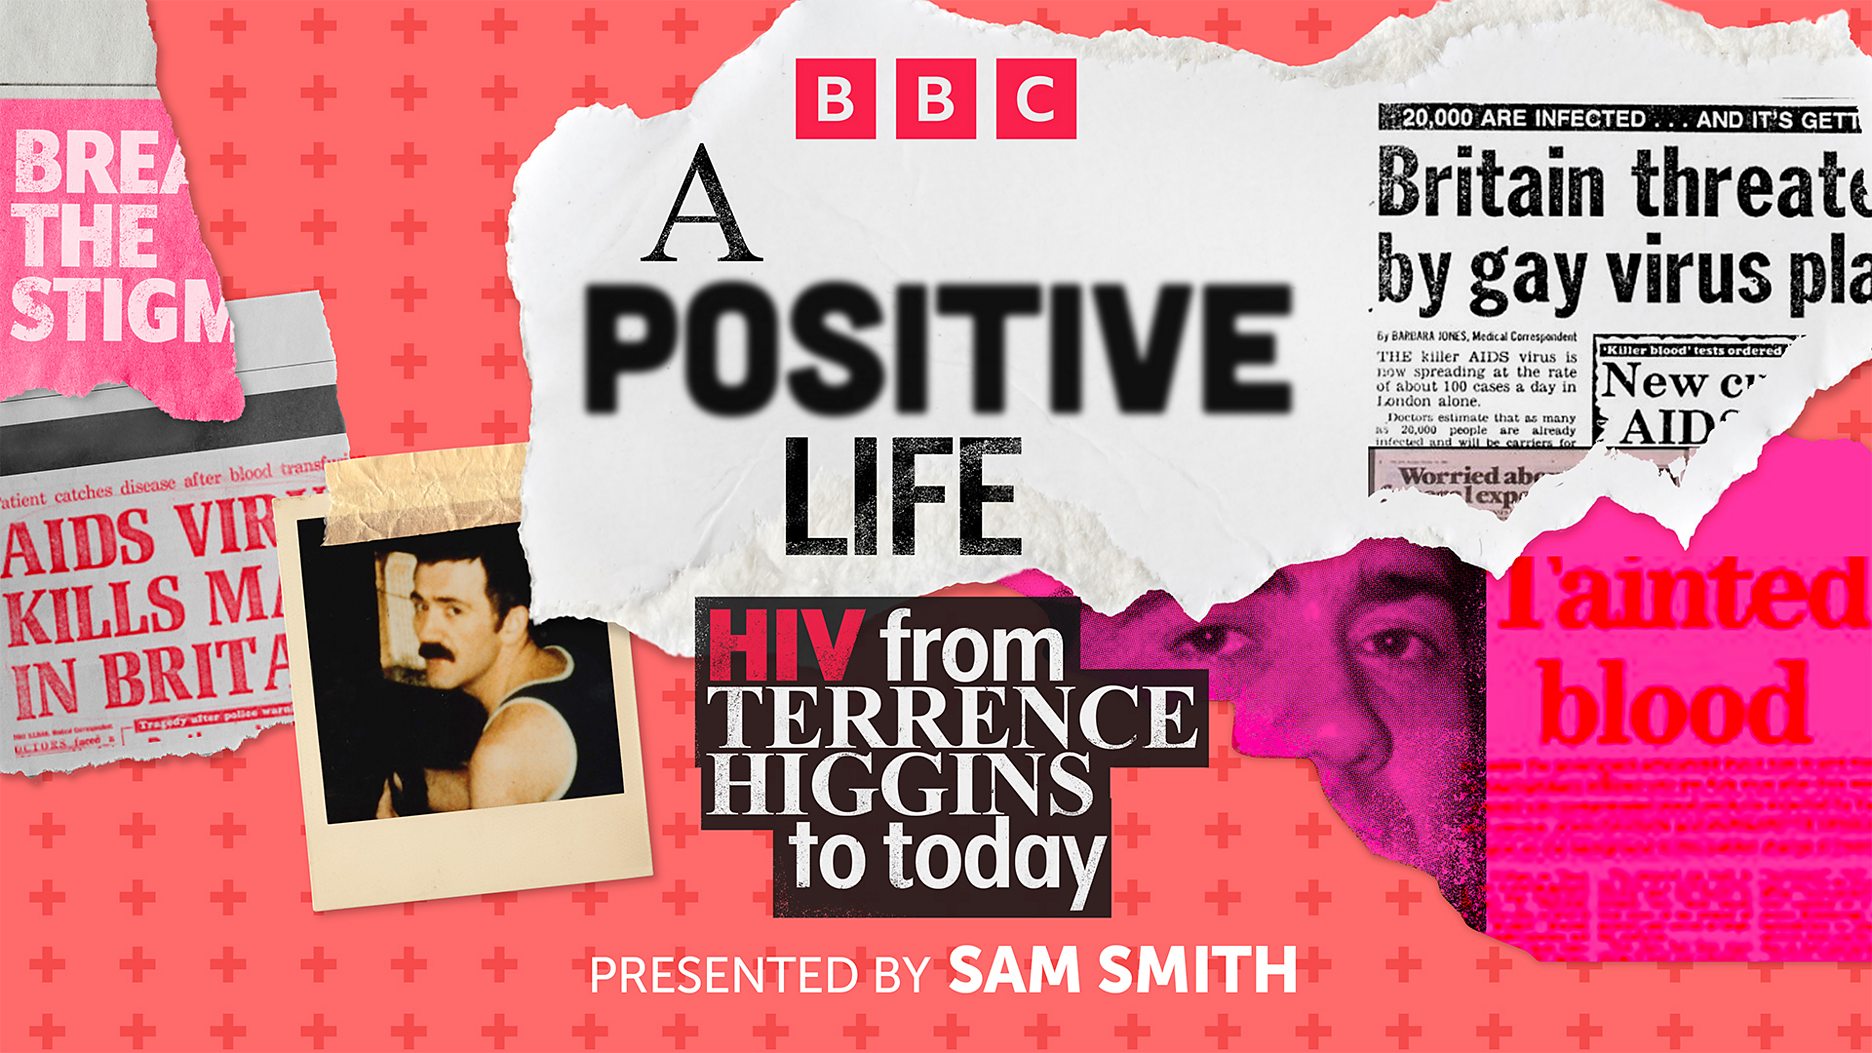 BBC wins 22 gongs including Podcast of the Year for A Positive Life, narrated by Sam Smith